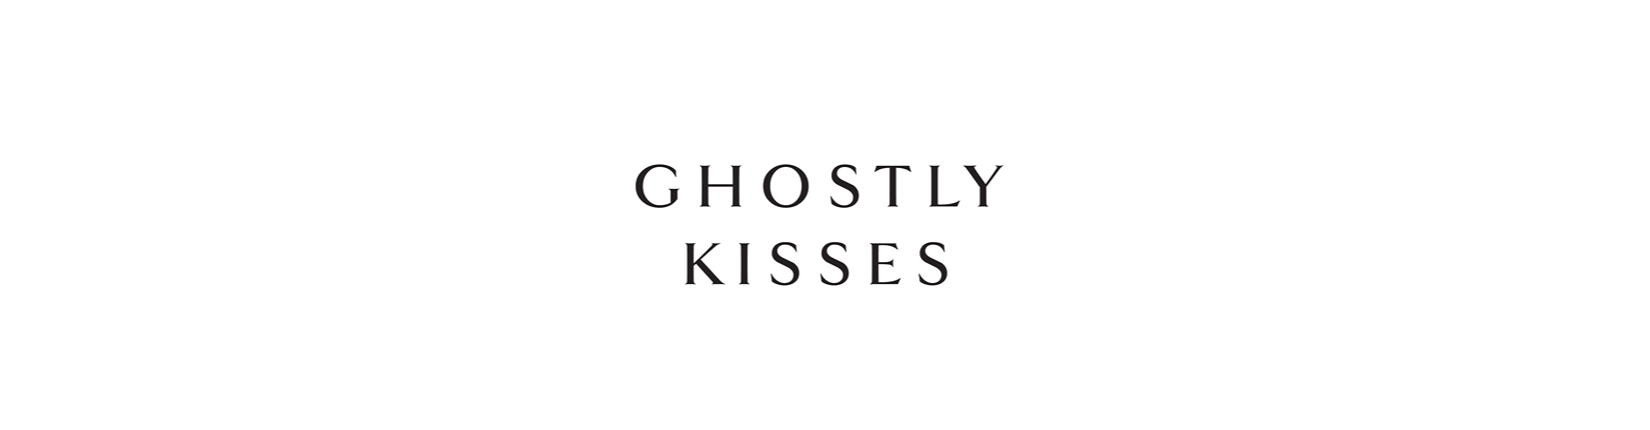 Ghostly Kisses - Torpille